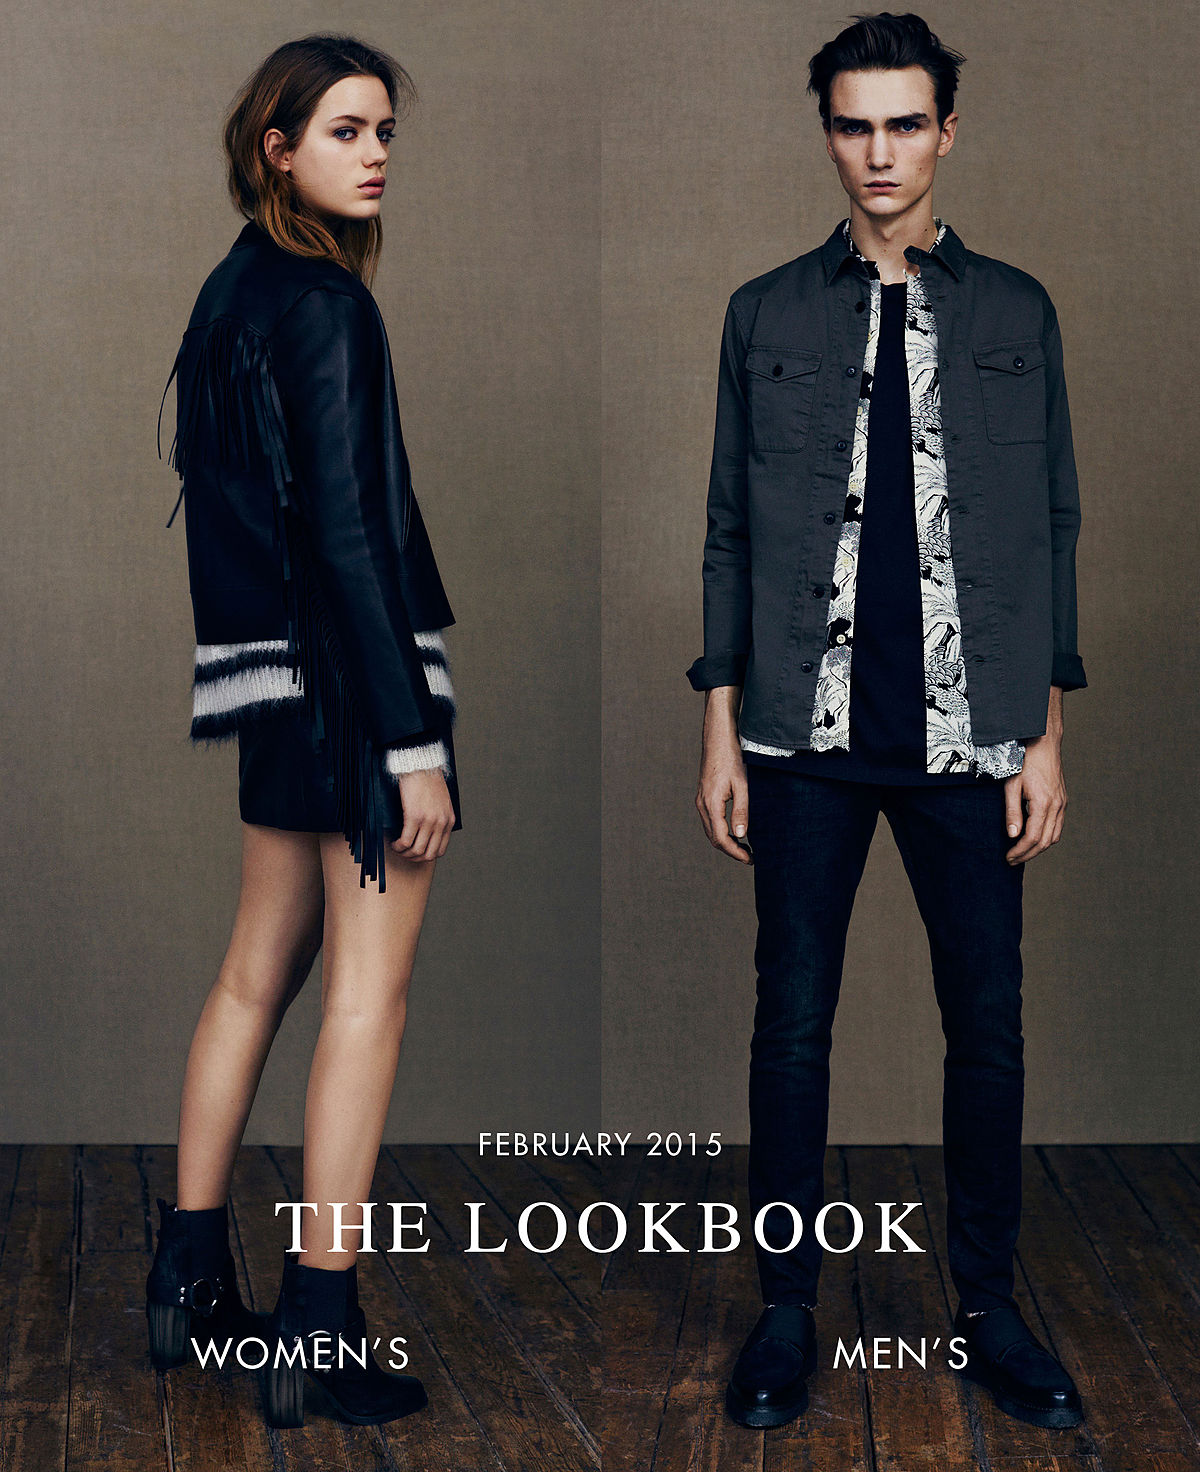 ALLSAINTS: Iconic Leather Jackets, Clothing & Accessories